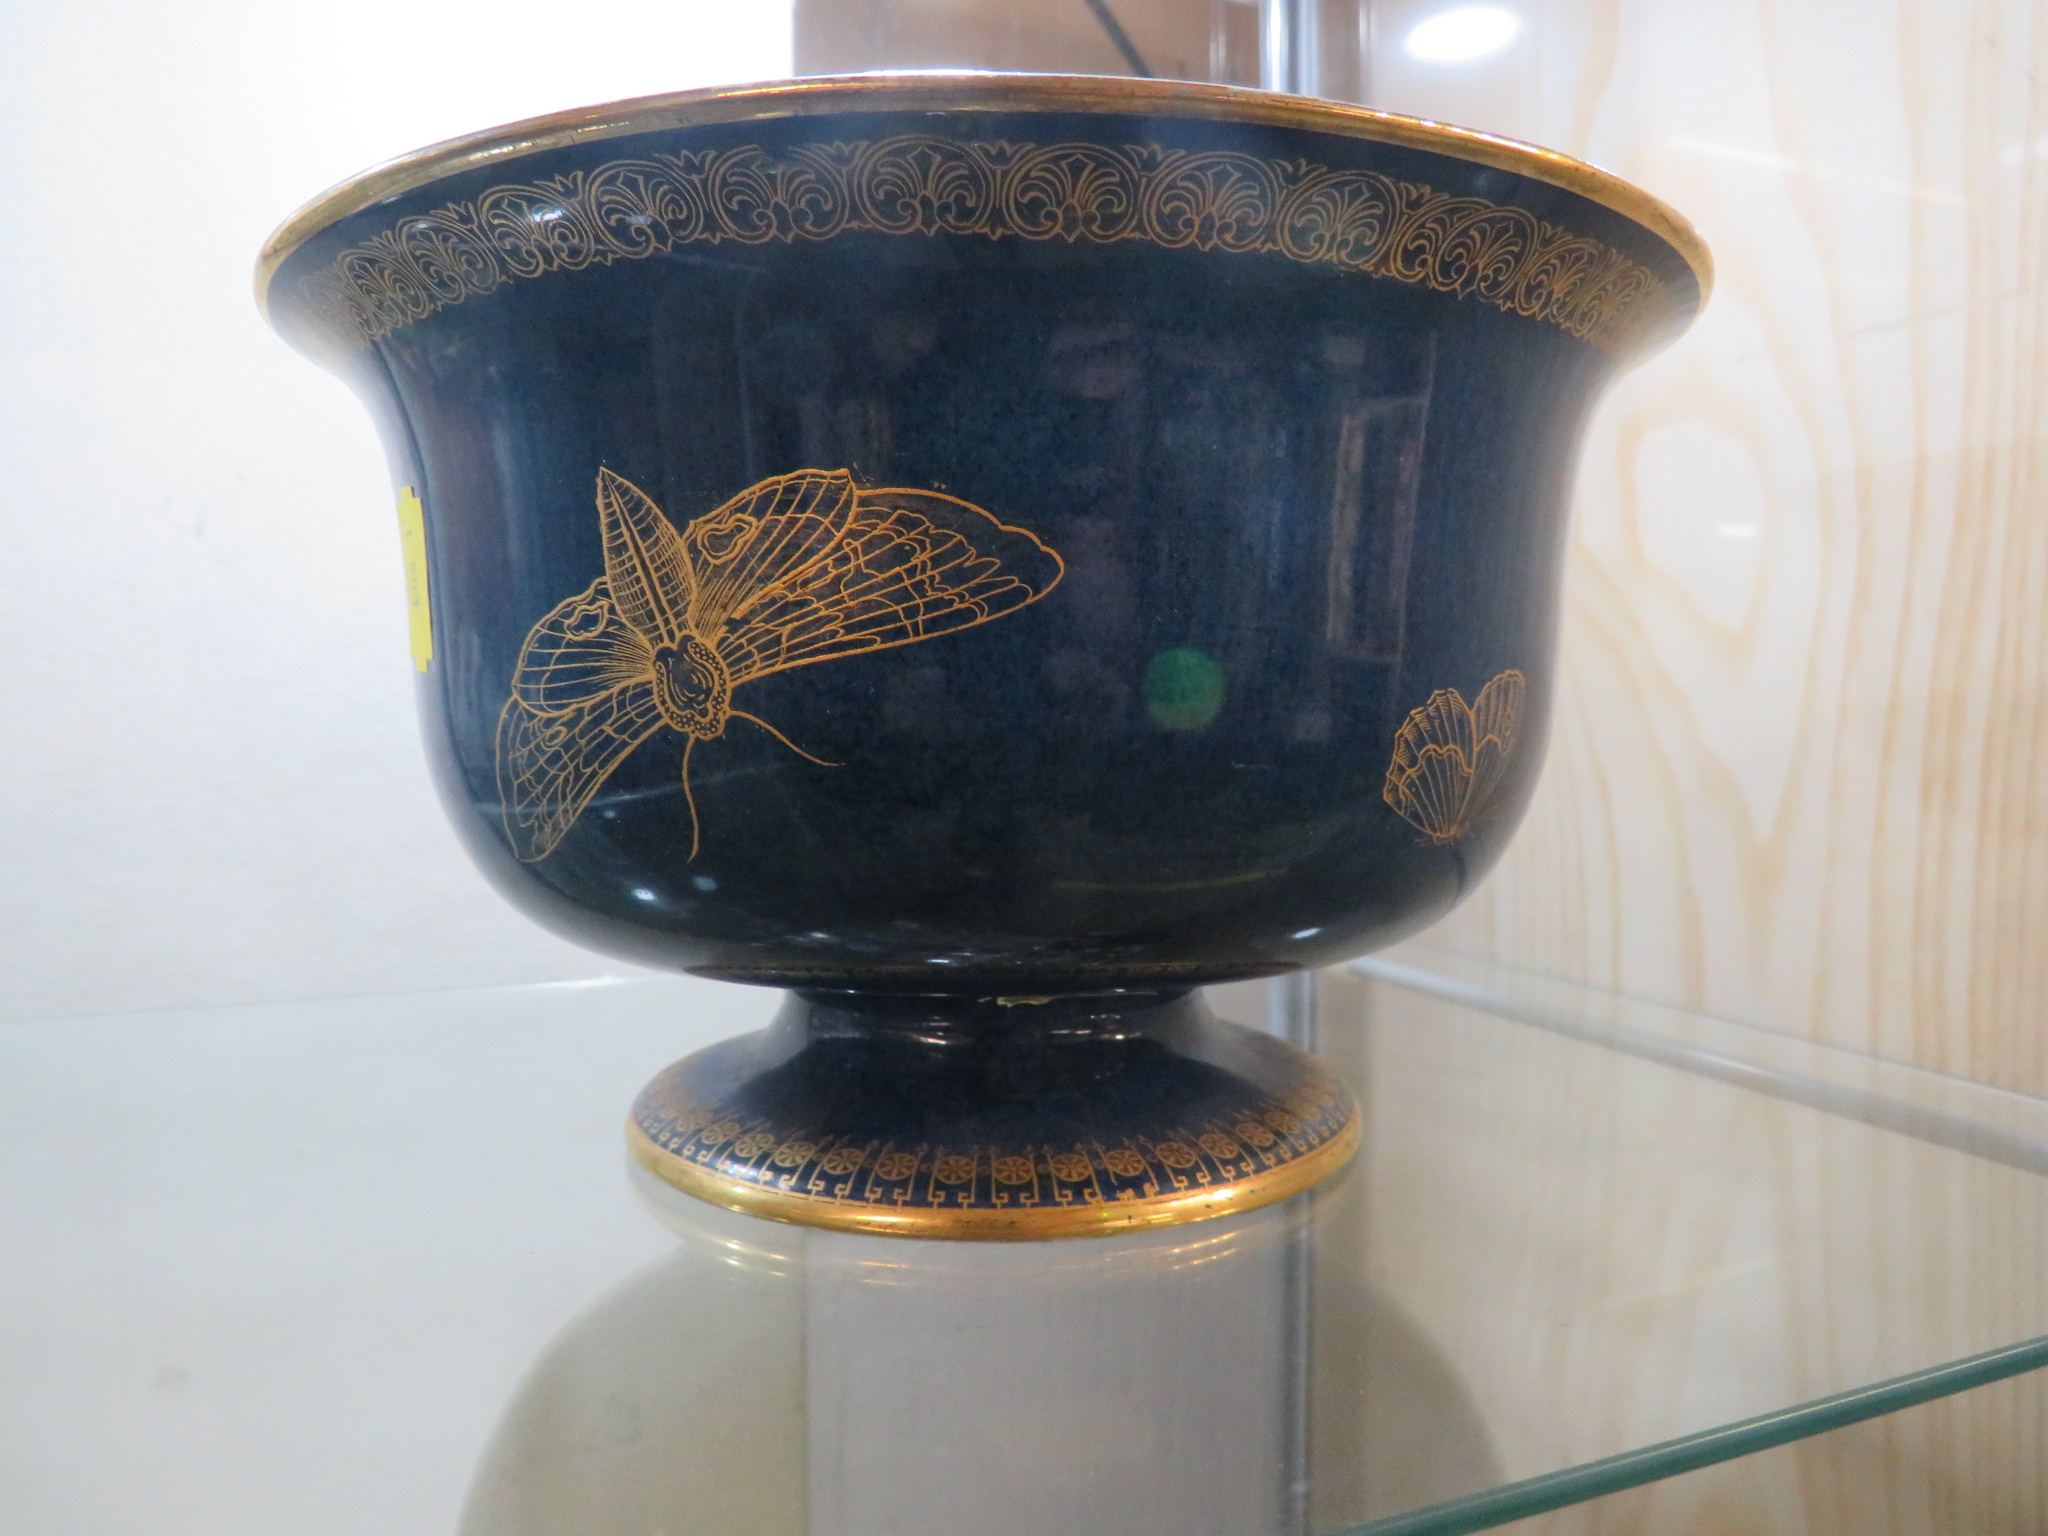 CARLTON WARE LUSTRE BOWL ON FOOT DECORATED WITH MOTHS AND BUTTERFLIES, THE EXTERIOR MOTTLED BLUE - Image 3 of 4